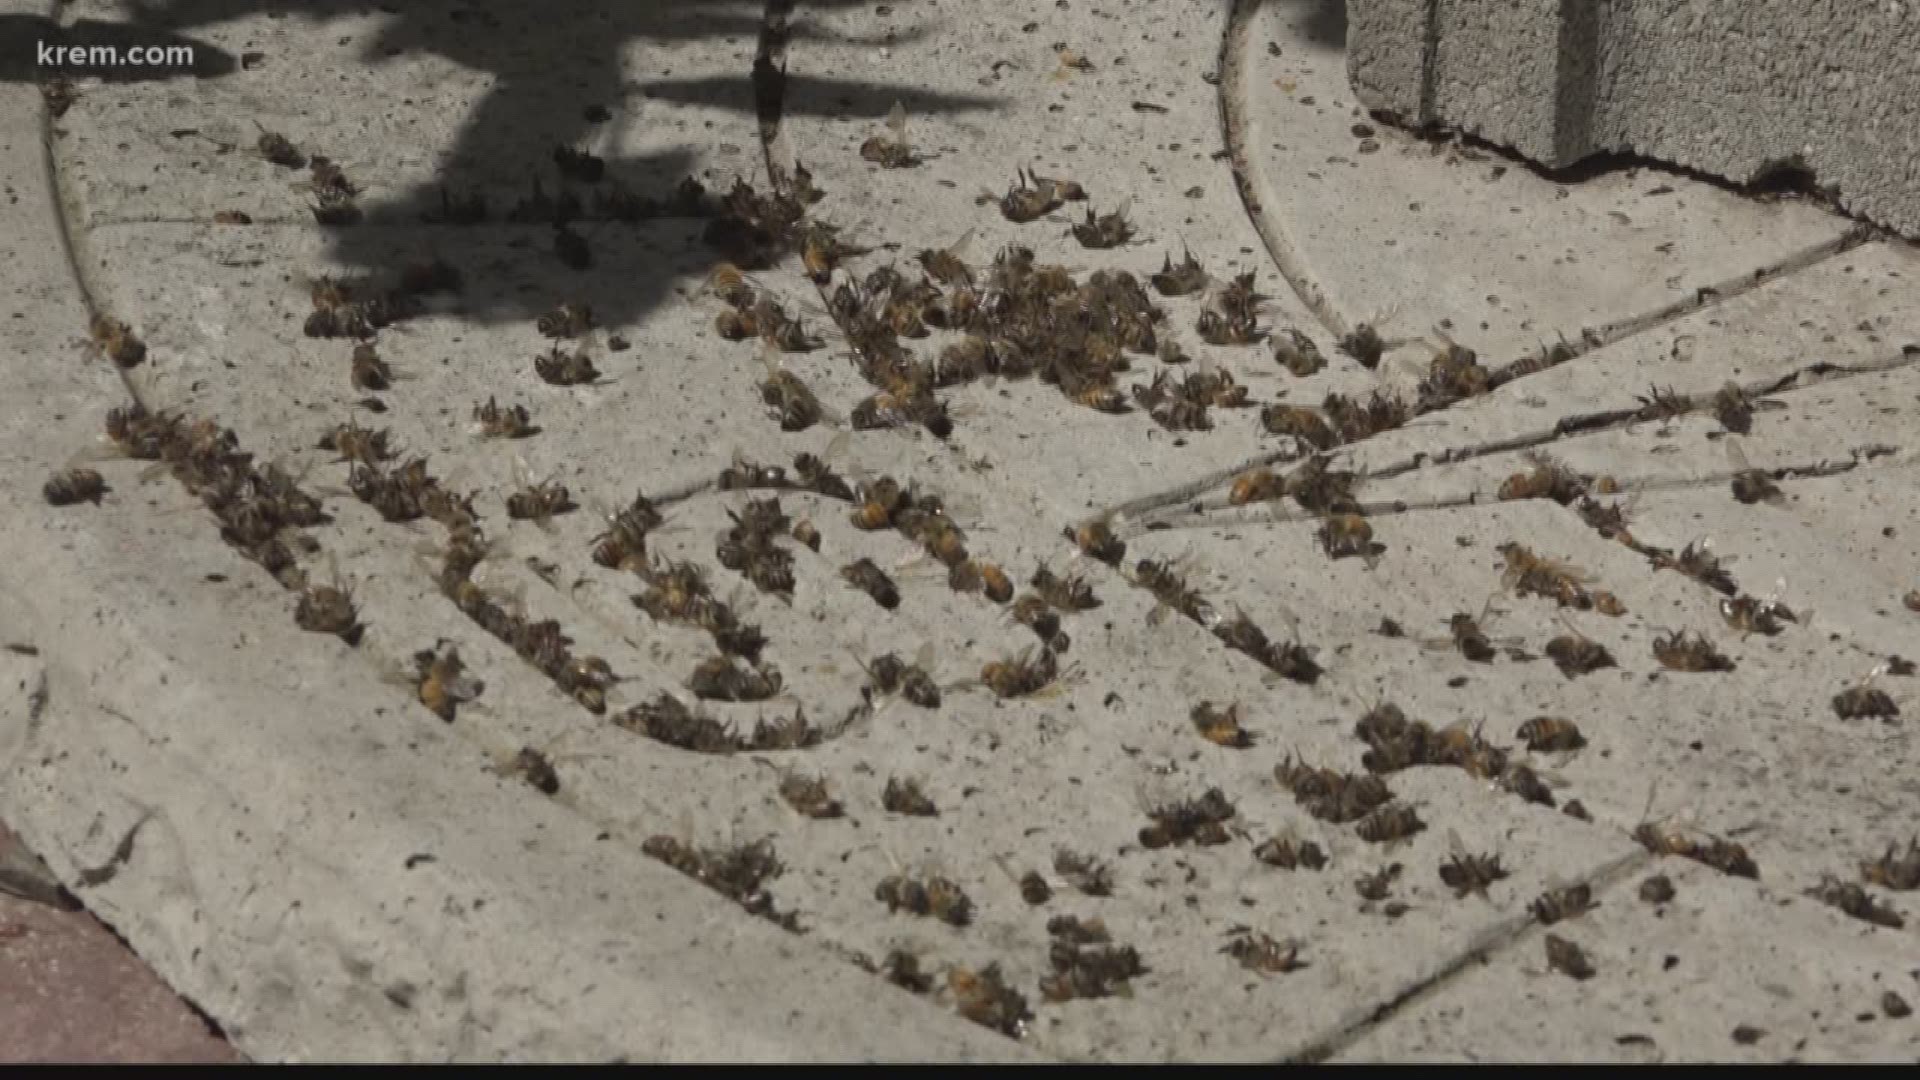 KREM's Tim Pham spoke with local beekeepers who are searching for answers after thousands of bees in the area died in the middle of summer.